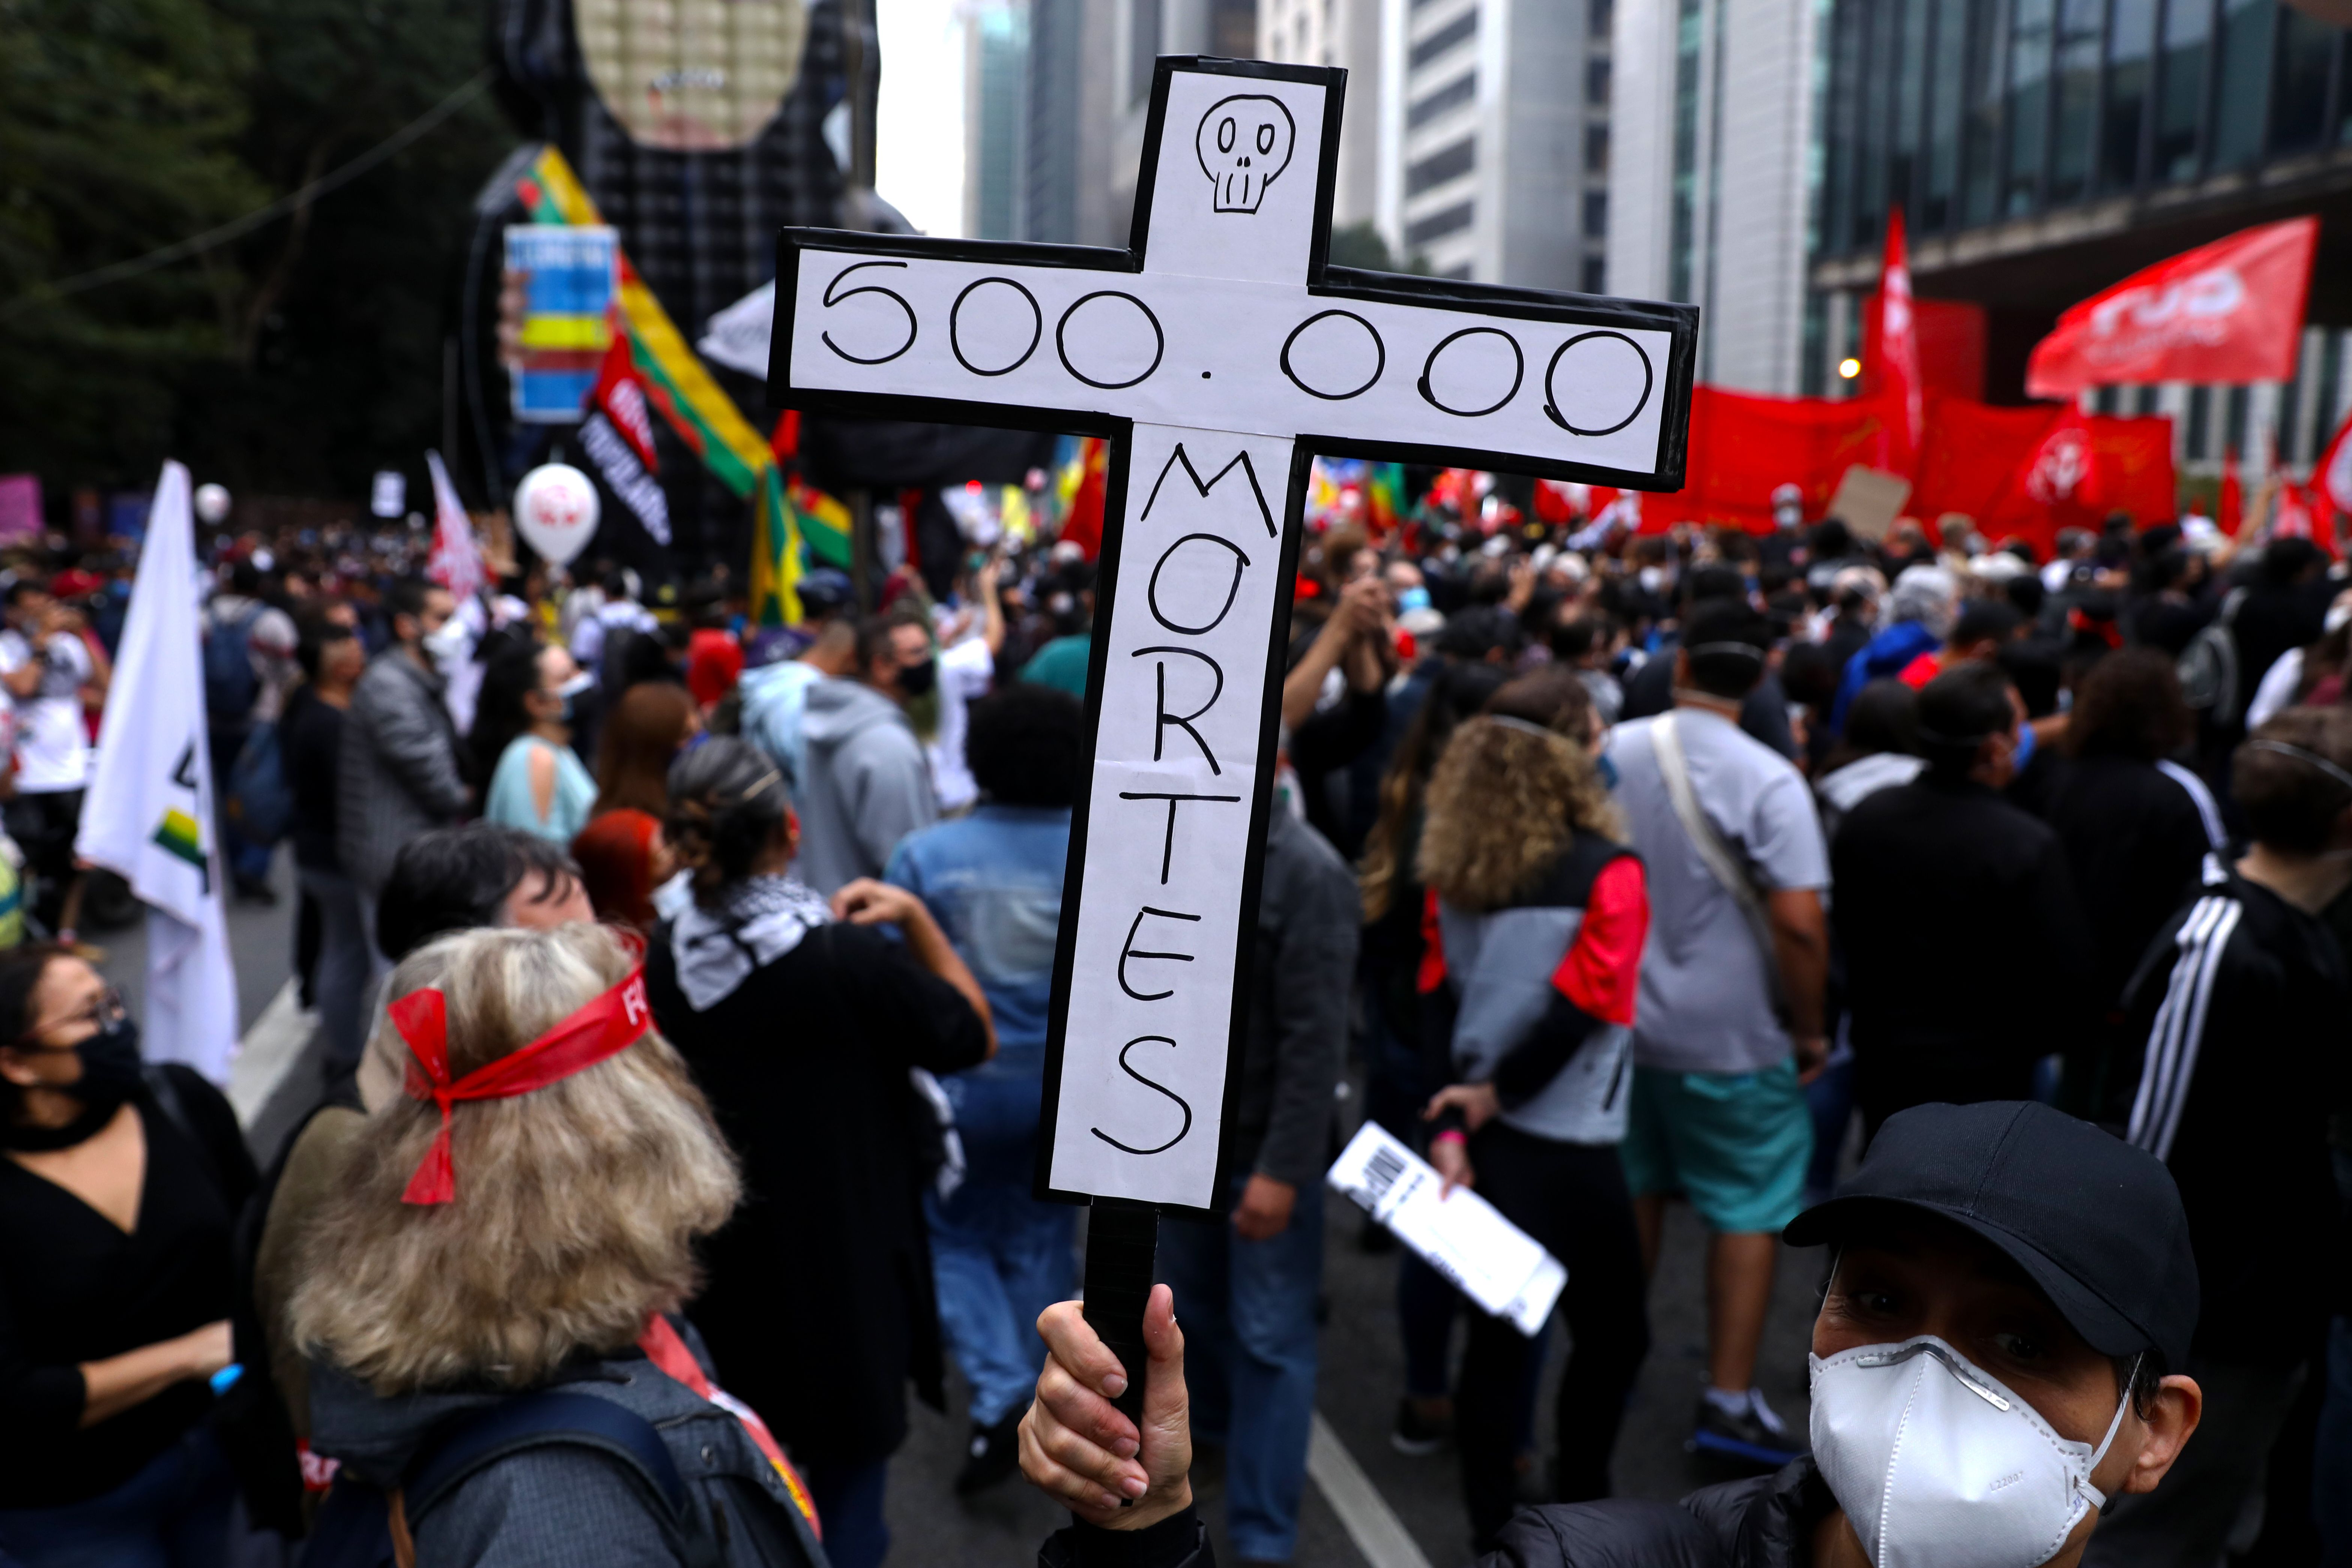 A demonstrator holds a sign in the shape of a cross with the phrase '500,000 deaths' during a protest against Bolsonaro's administration on June 19, 2021 in Sao Paulo, Brazil.